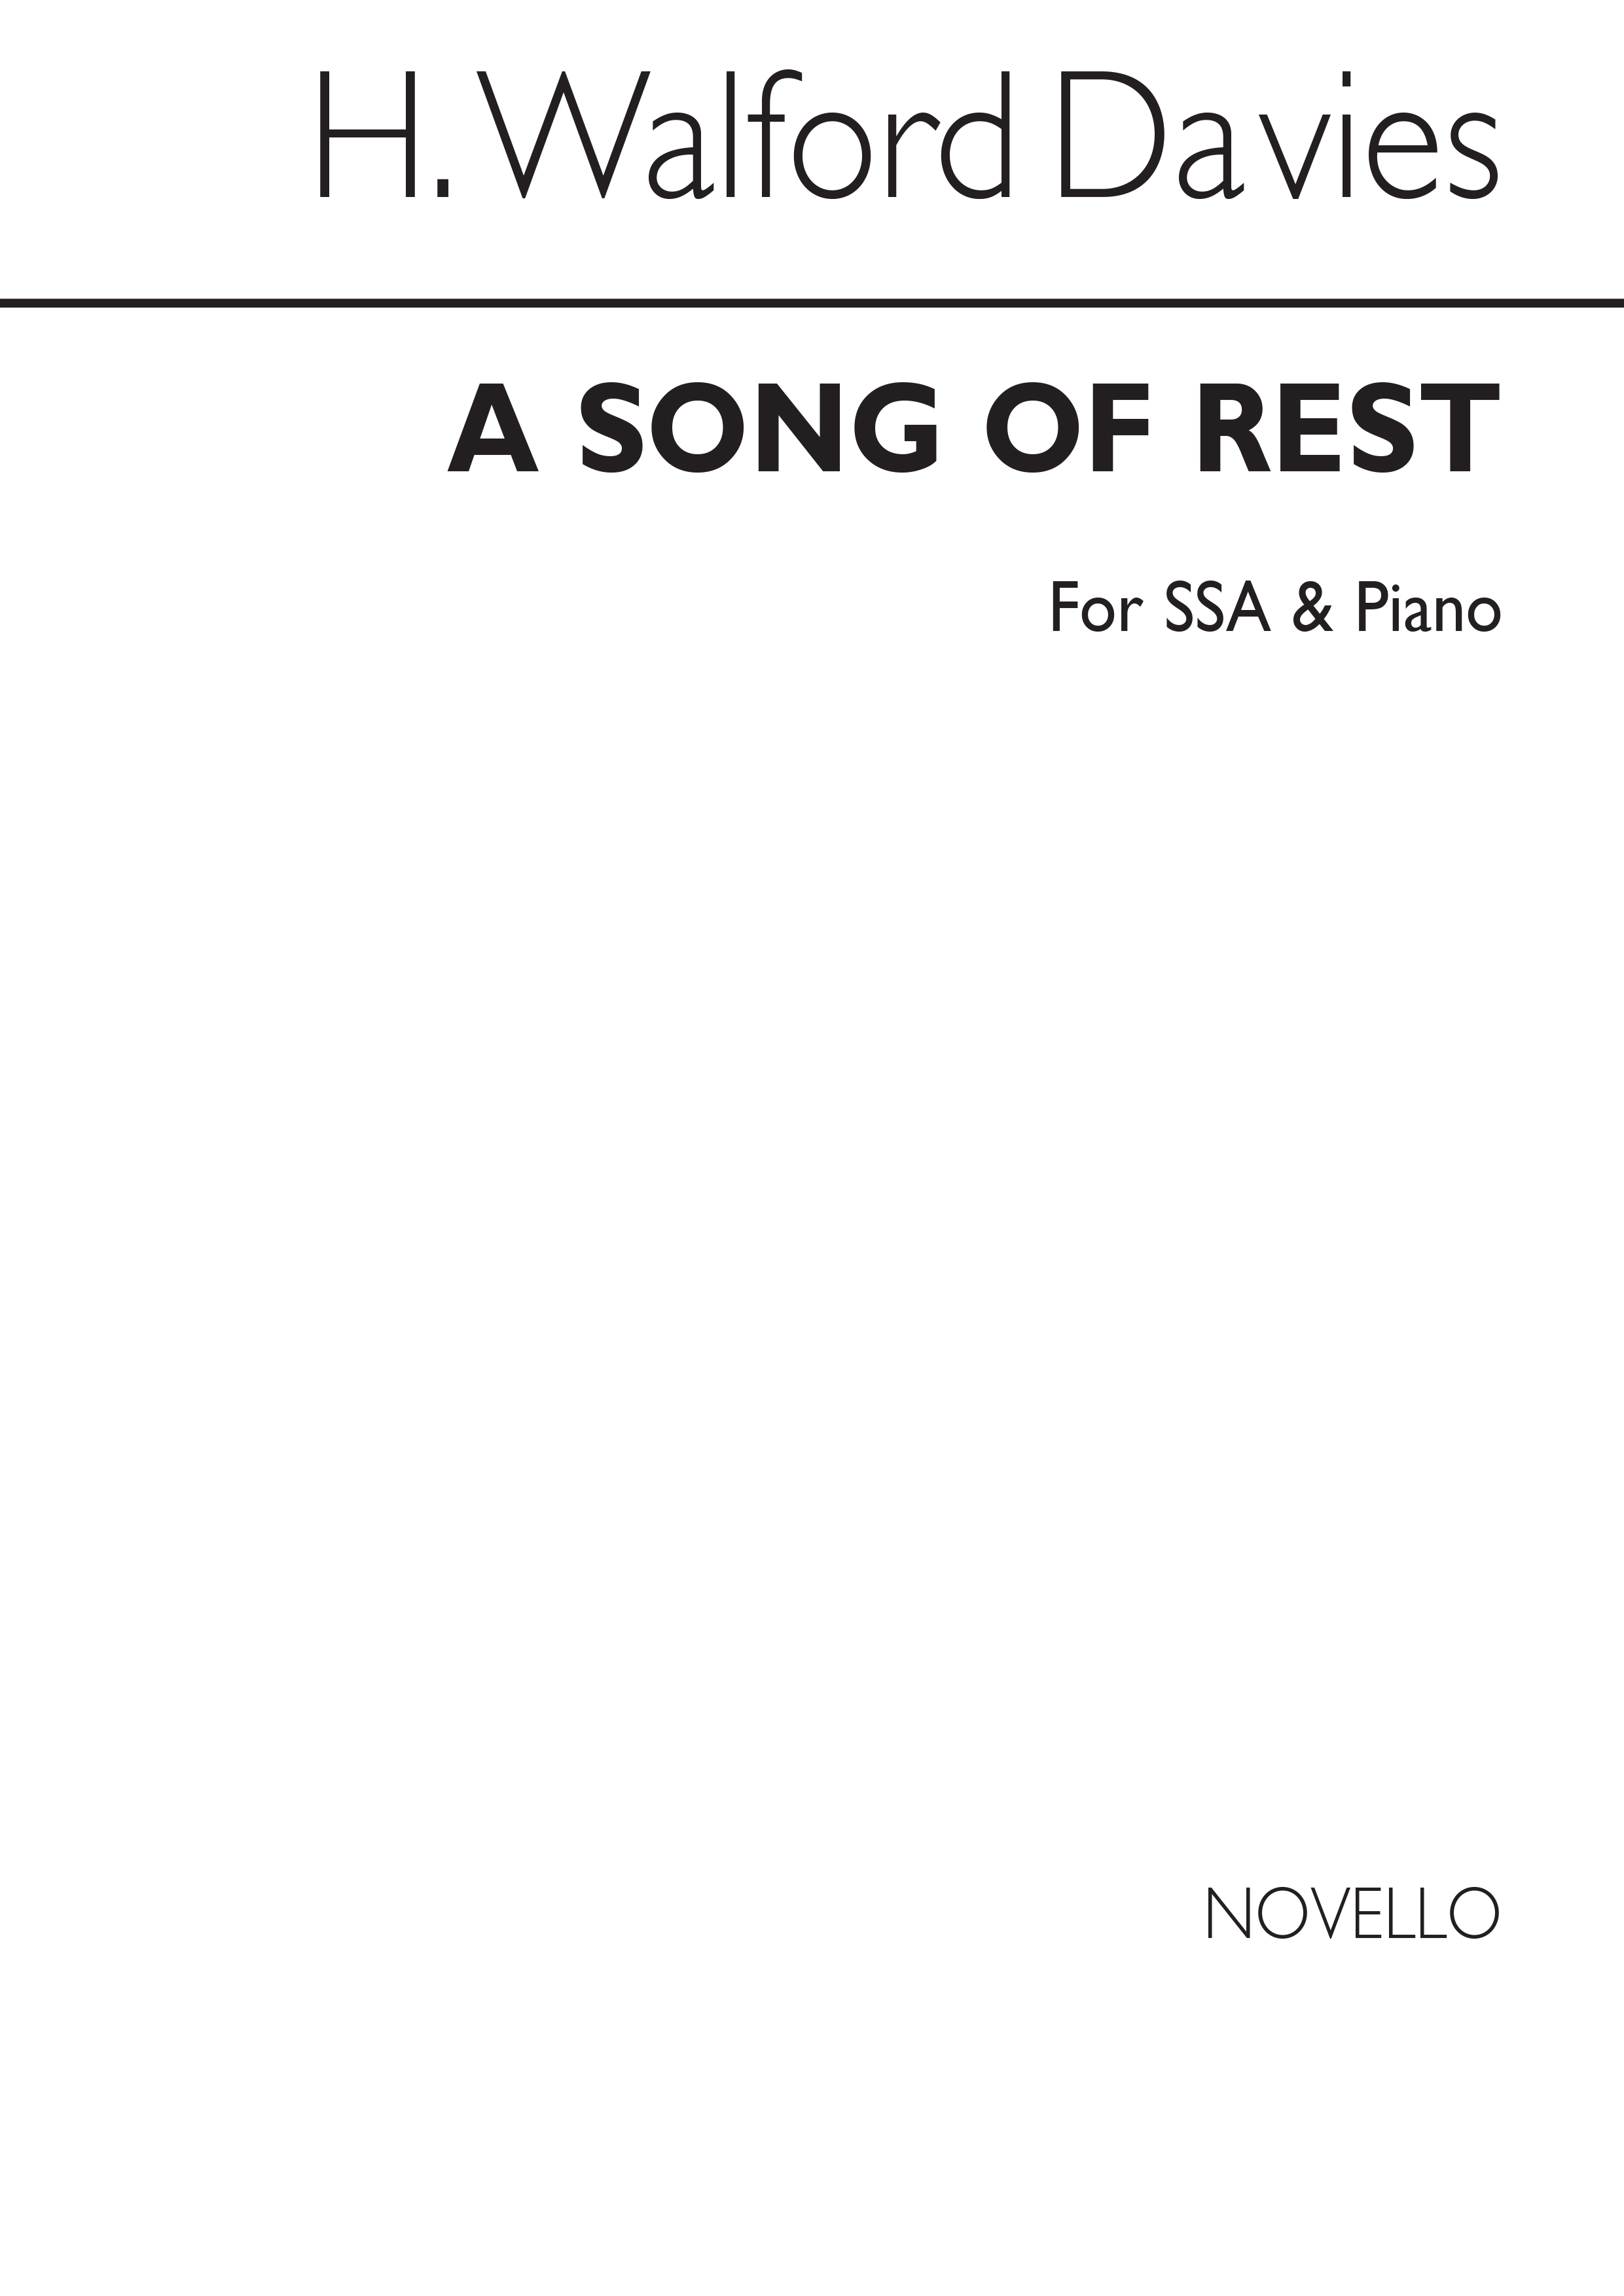 H. Walford Davies: A Song Of Rest Ssa And Piano: SSA: Vocal Score